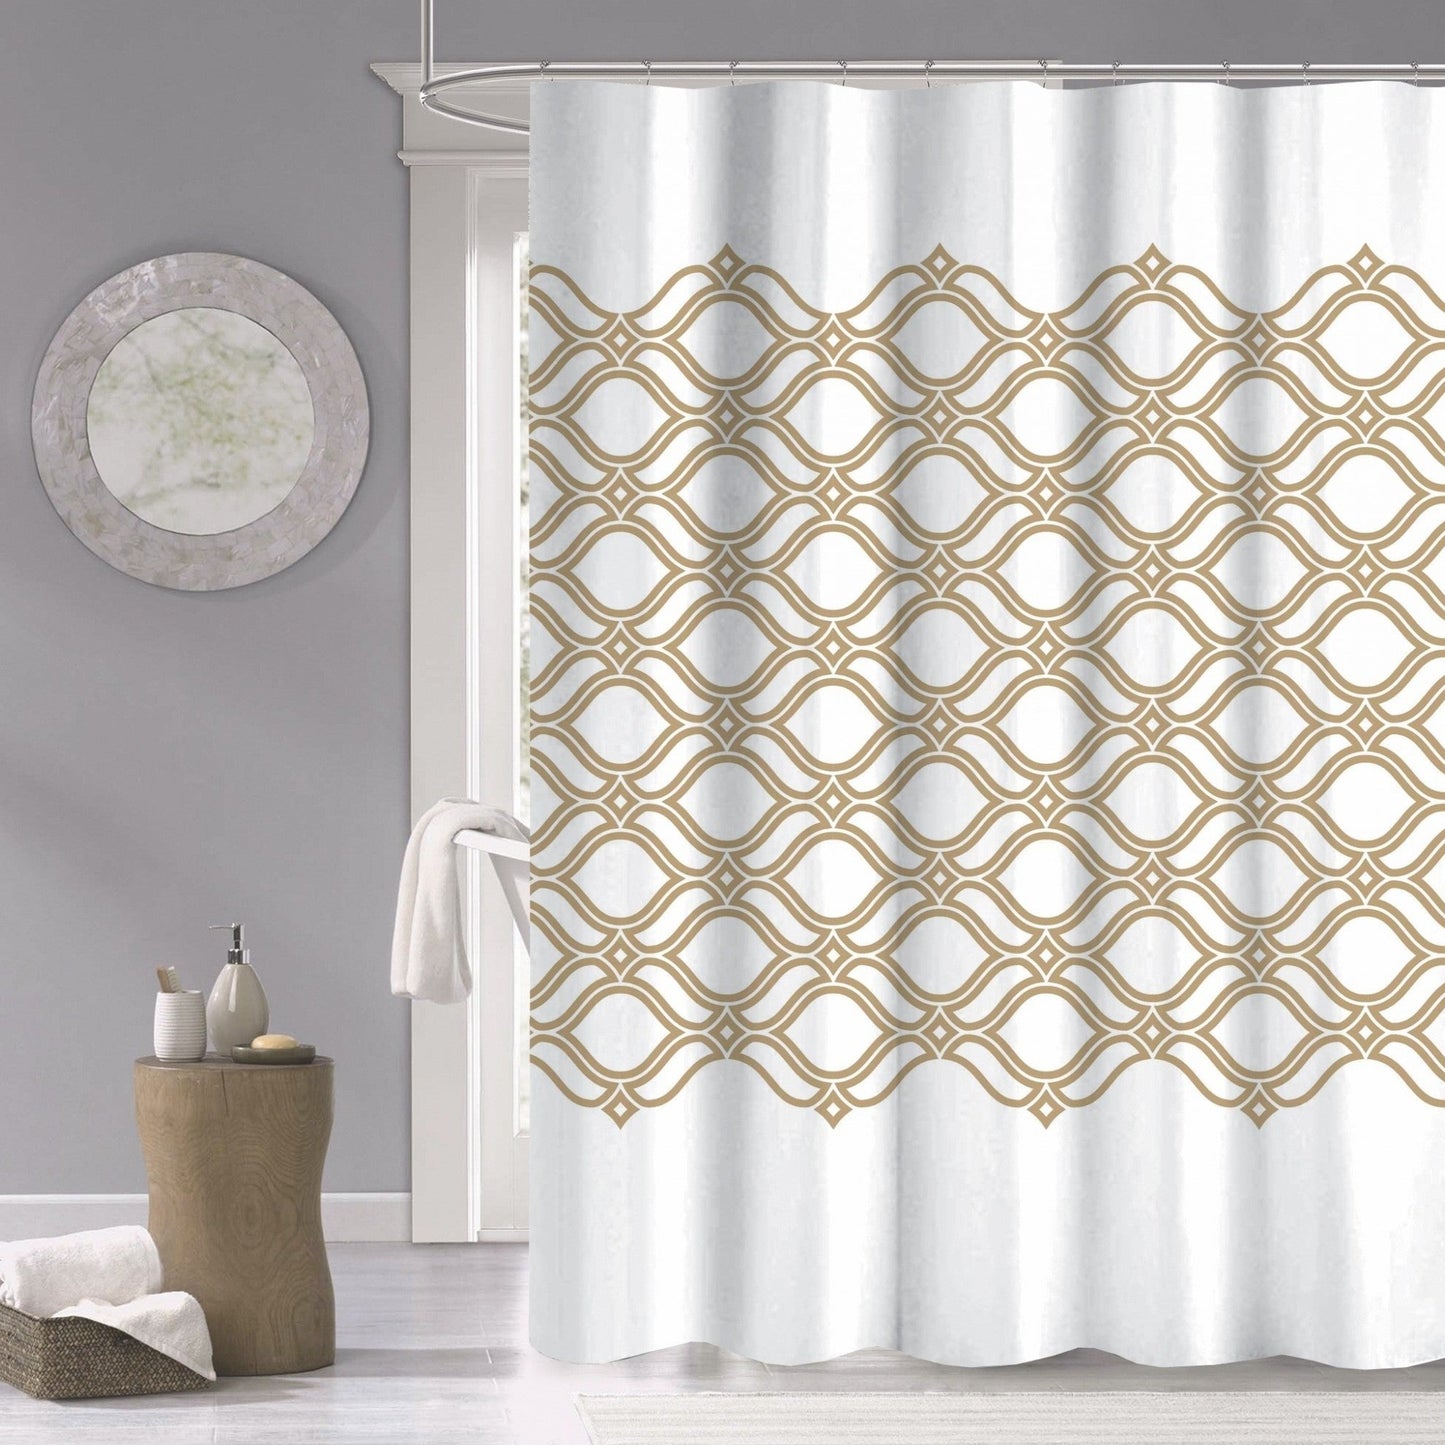 Gold and White Printed Lattice Shower Curtain-0